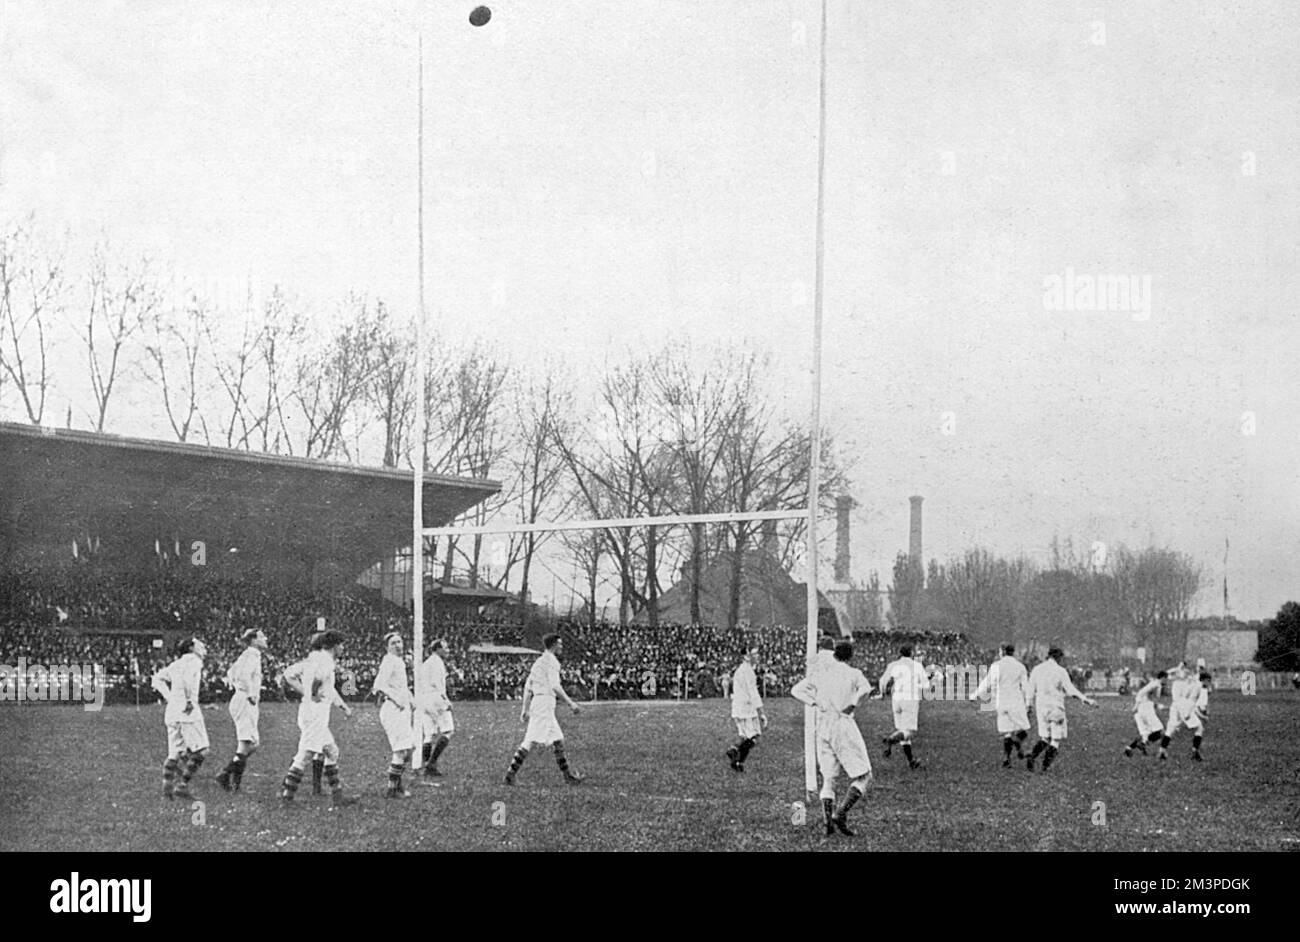 A scene from the France v England rugby union match, at Colombes, Paris. This concluding match in the Five Nations Championship of 1914 was won 13-39 by England to give them overall victory in the Championship that year. Here, the English players watch as the French successfully convert their first try.     Date: 13 April 1914 Stock Photo